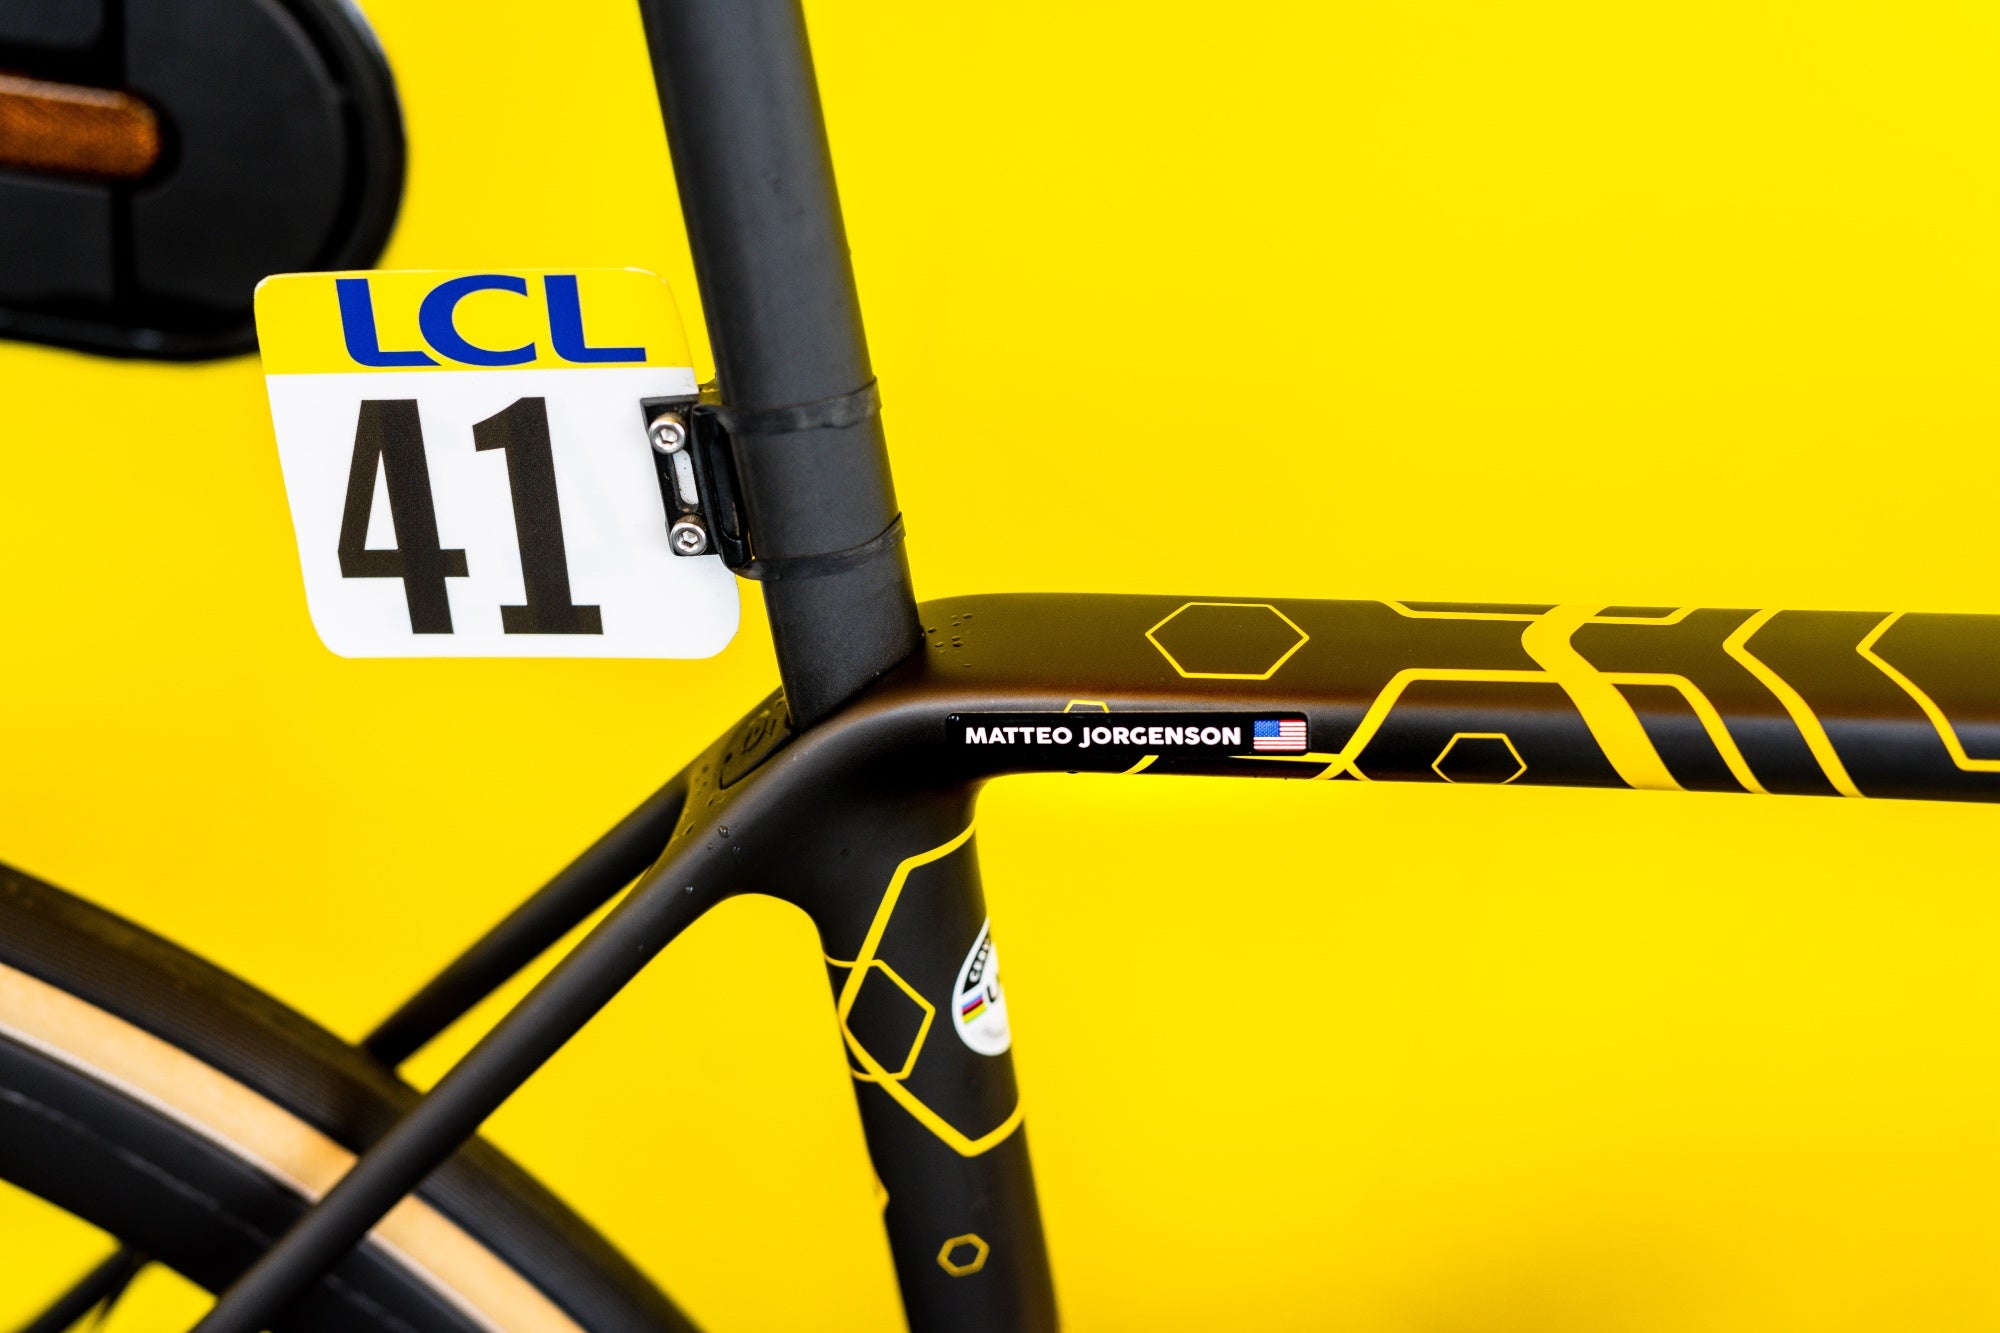 Top tube and race number of Matteo Jorgenson's Cervélo R5